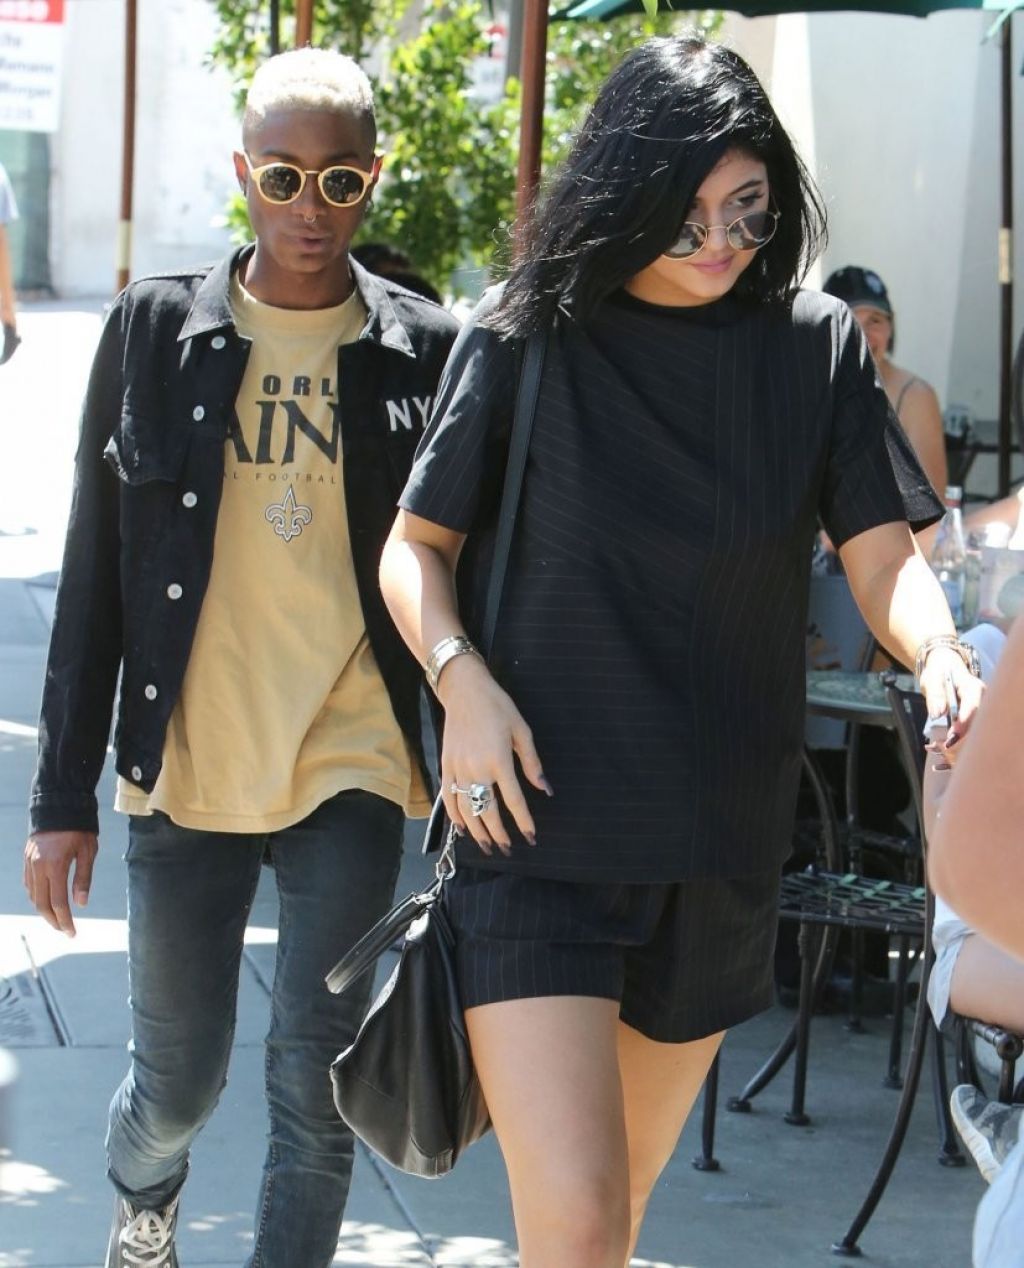 Kylie Jenner West Hollywood May 21, 2017 – Star Style